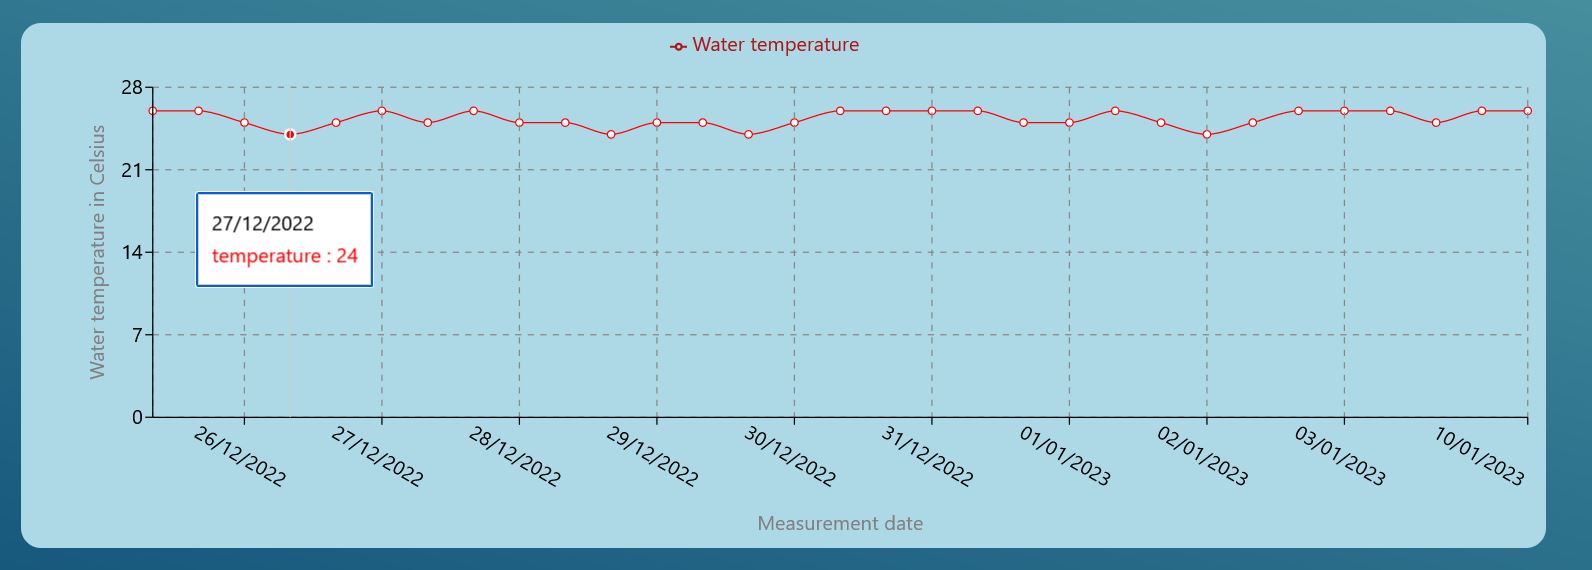  Water temperature history in the web page